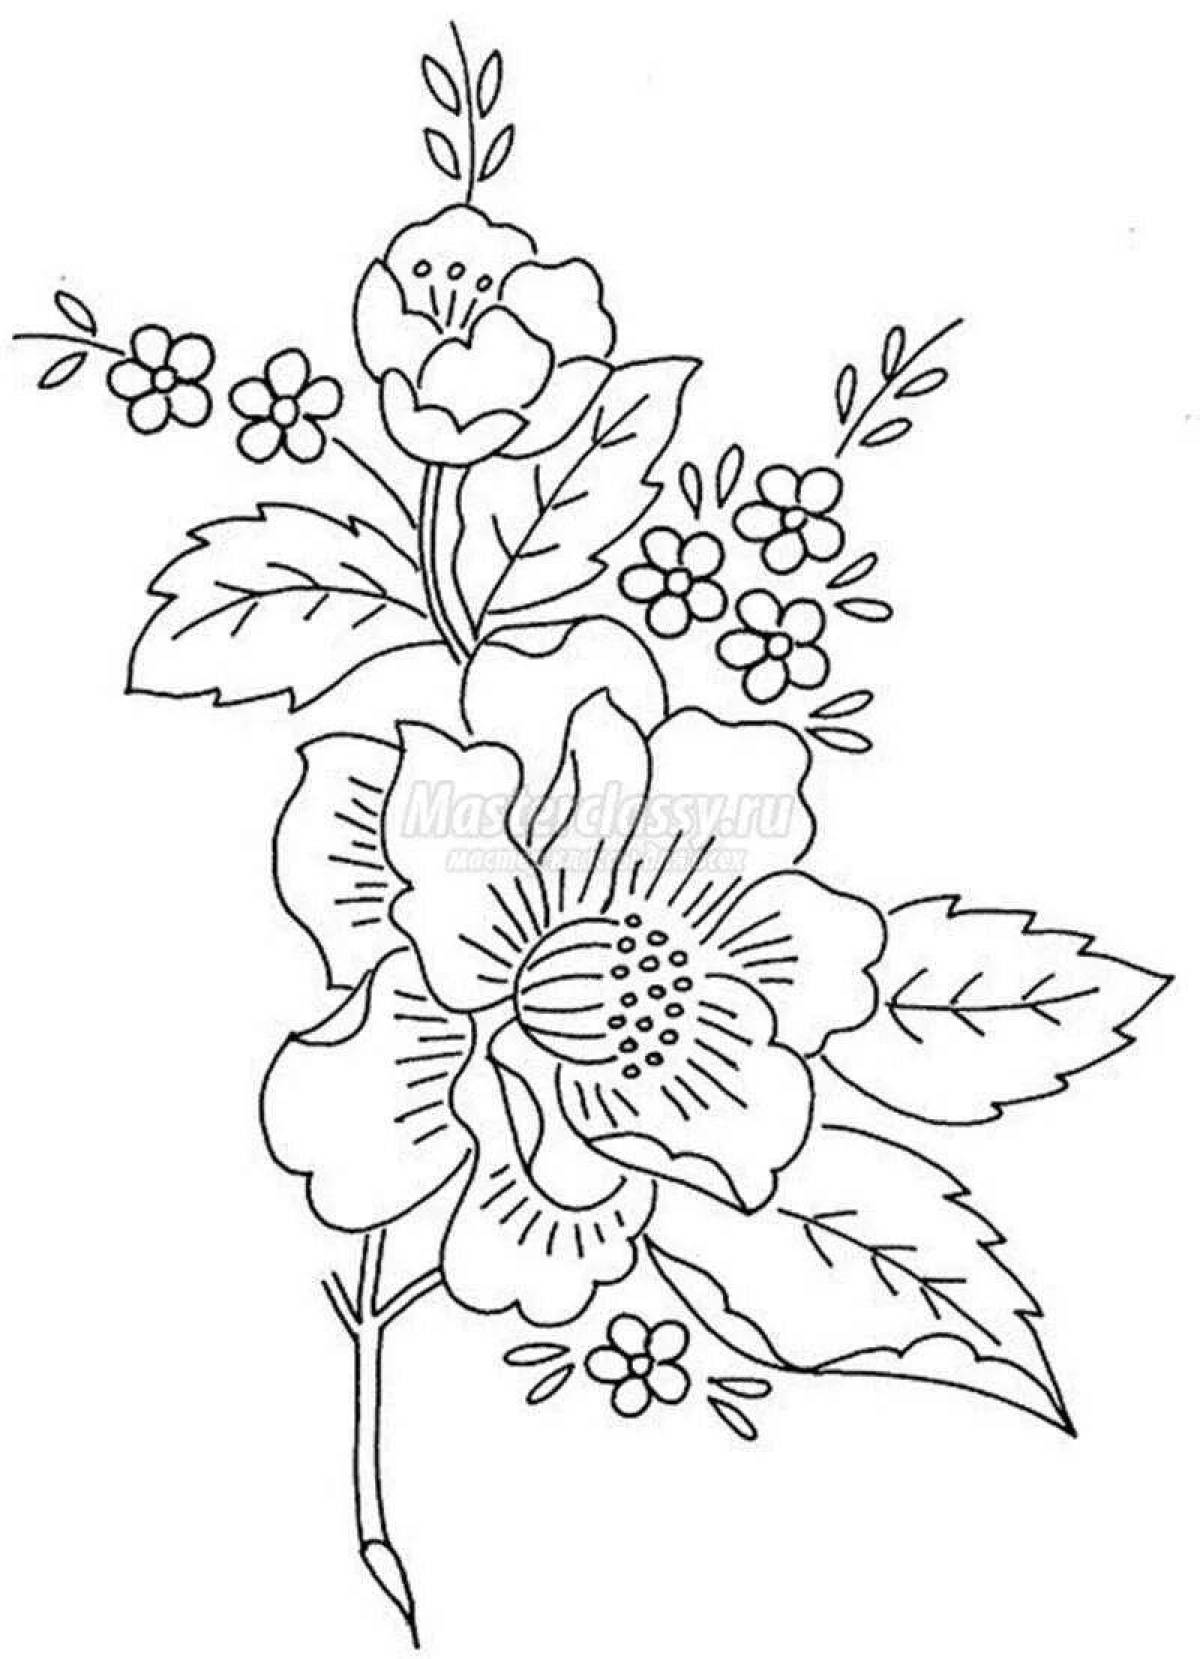 Coloring book with ornate embroidery